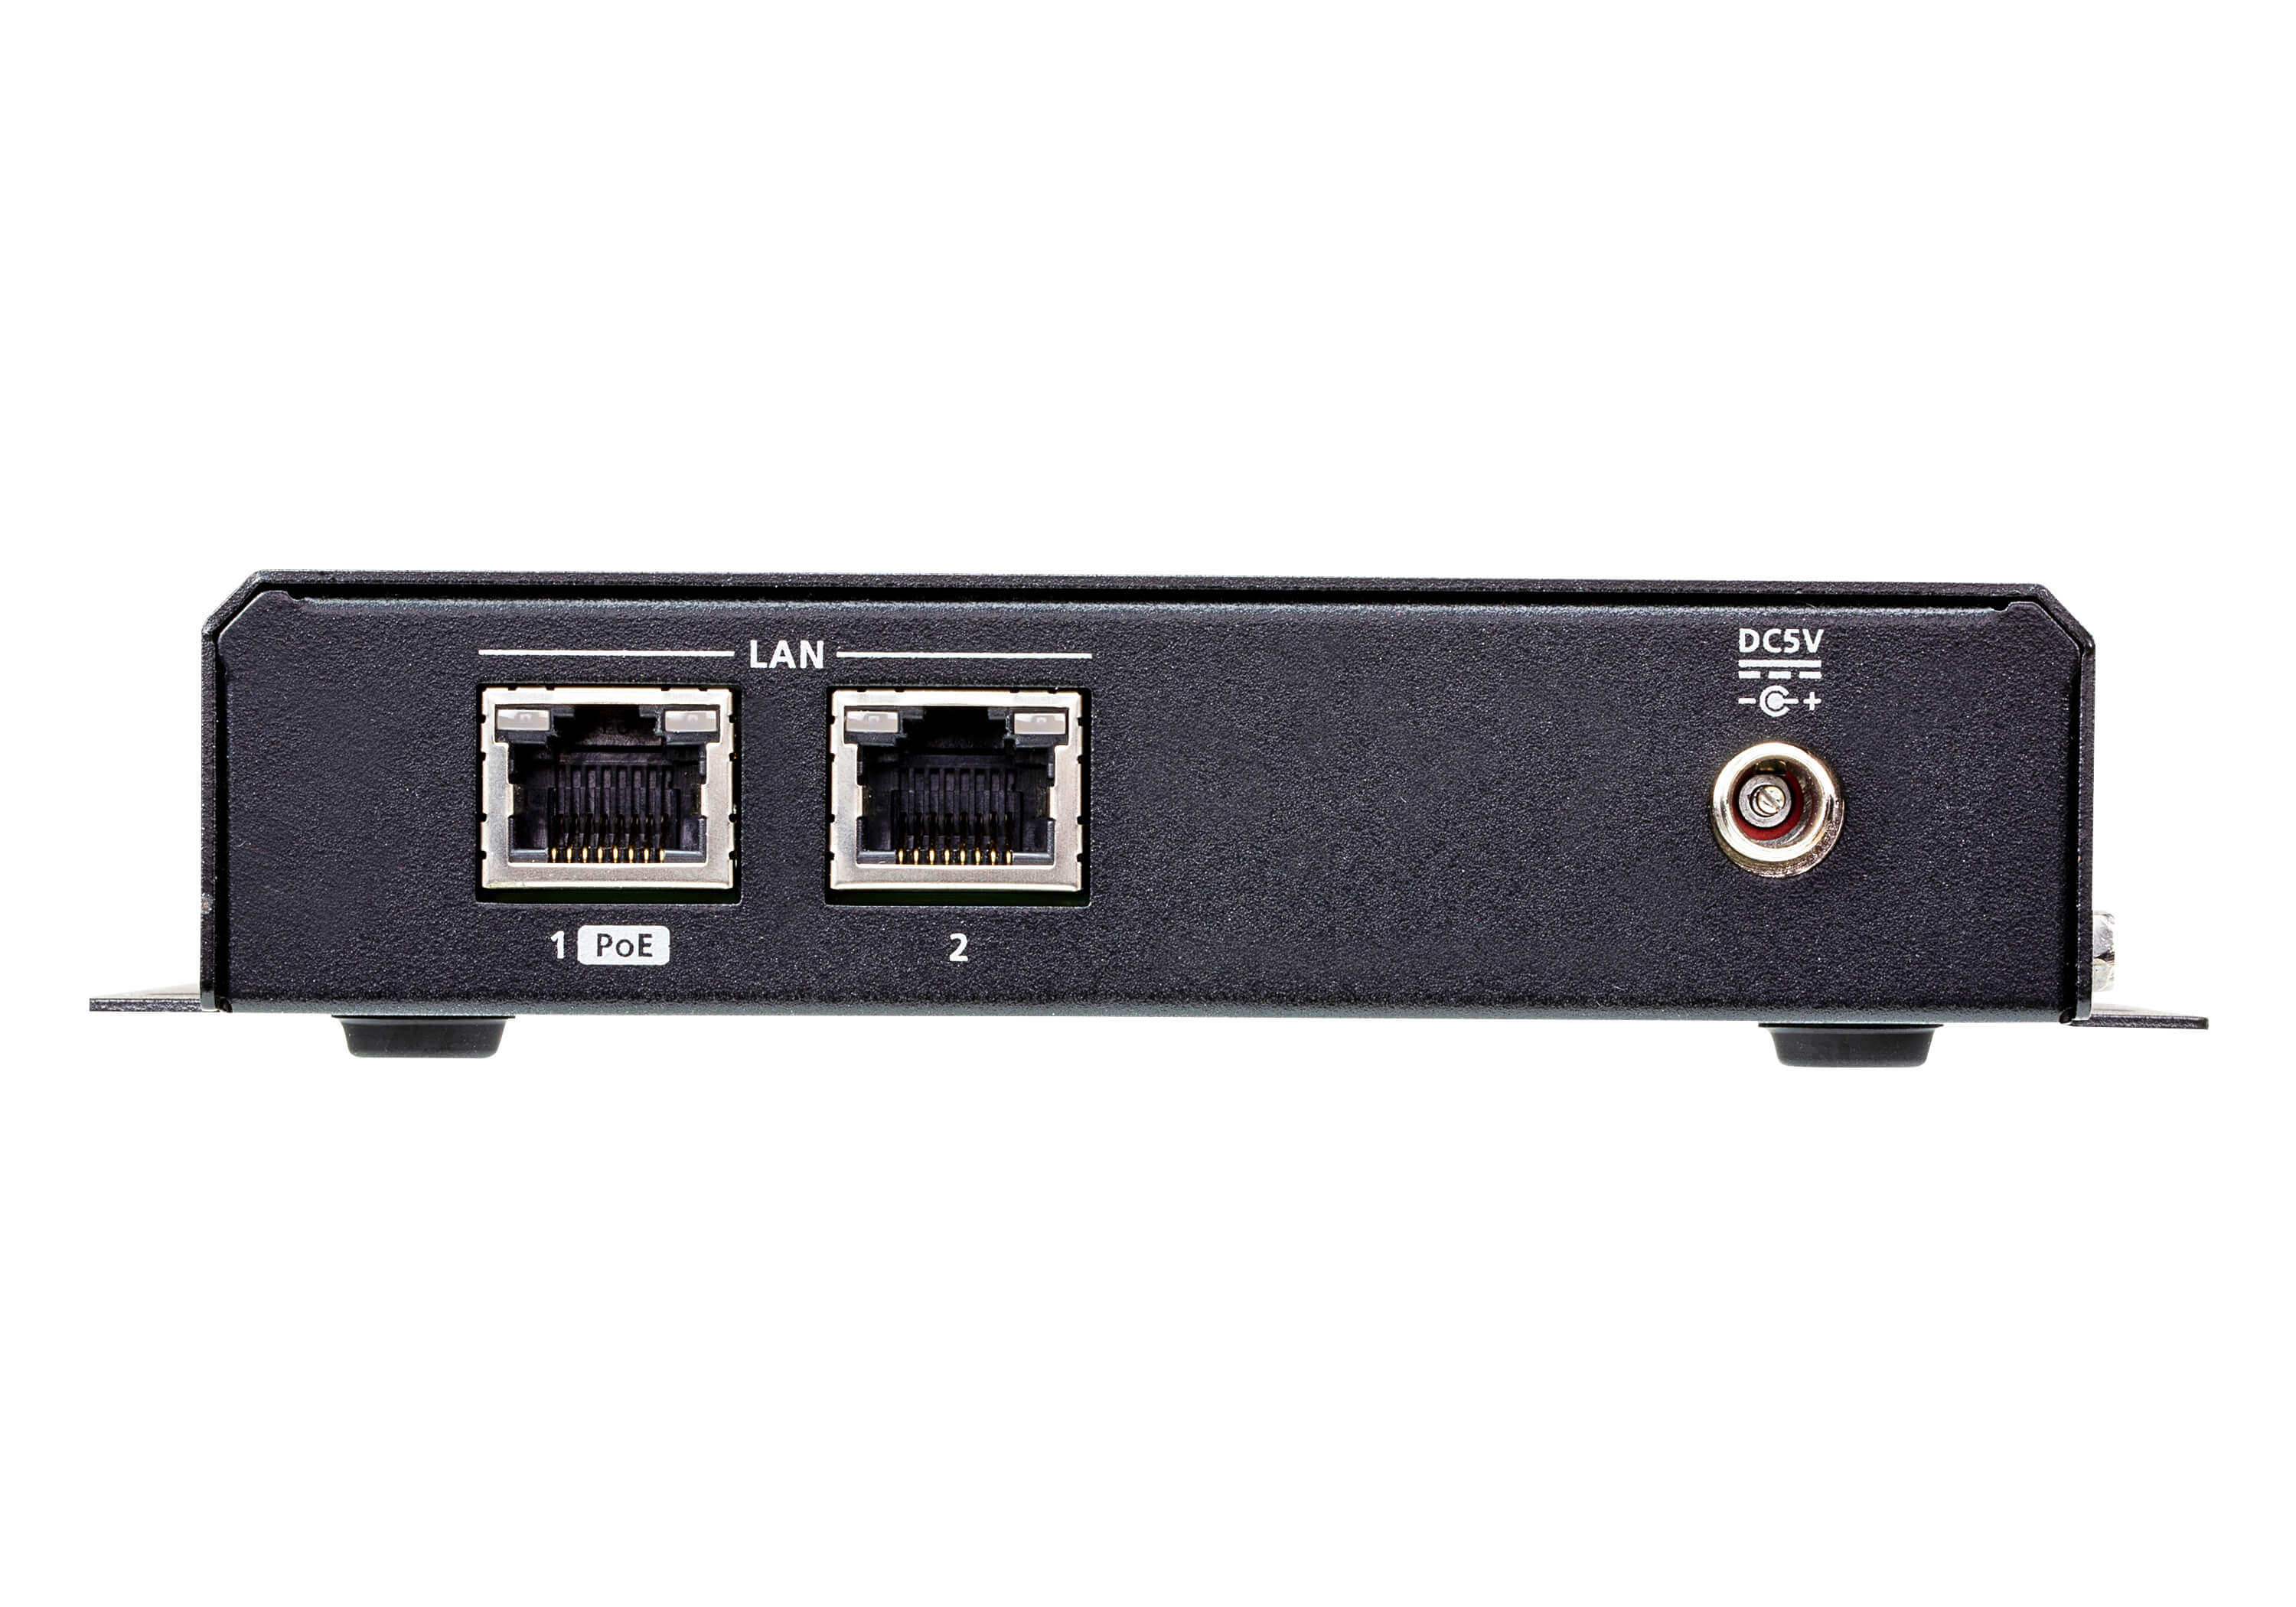 Aten 4K HDMI over IP Receiver with PoE -VE8952R (3 Year Manufacture Local Warranty In Singapore)